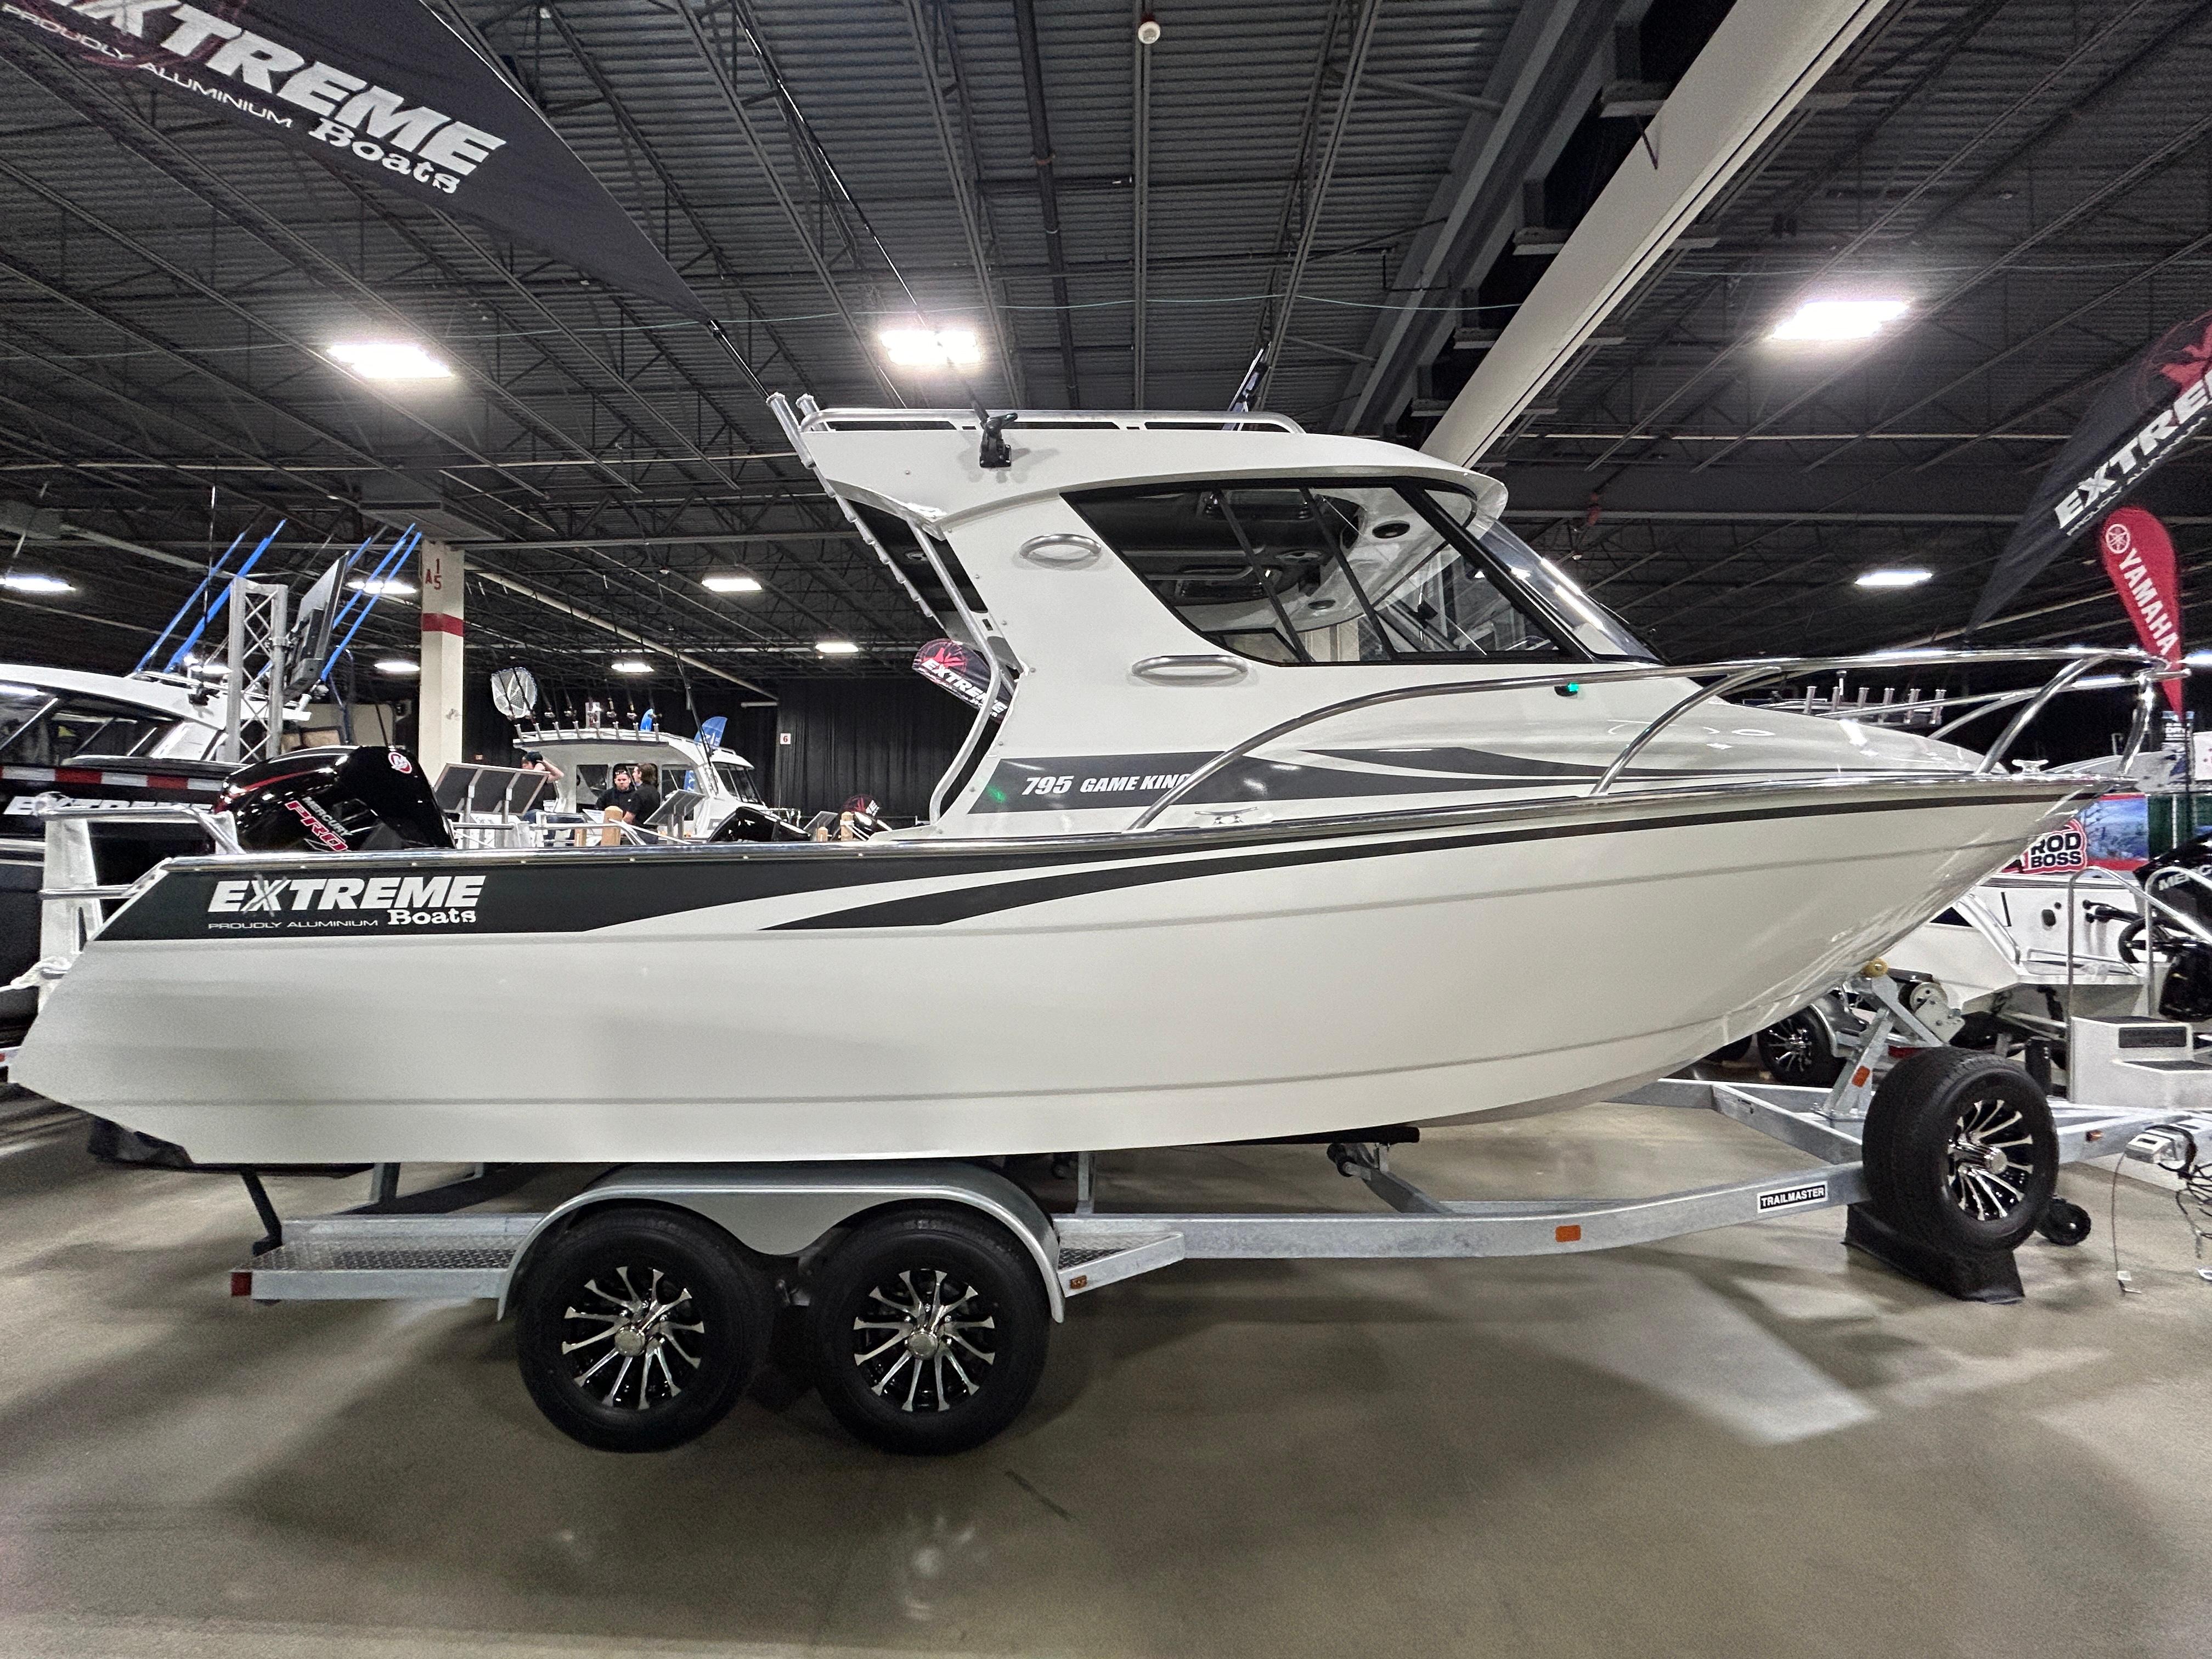 2024 Extreme Boats 795 Game King for sale by Parma Marine 440-915-8995 